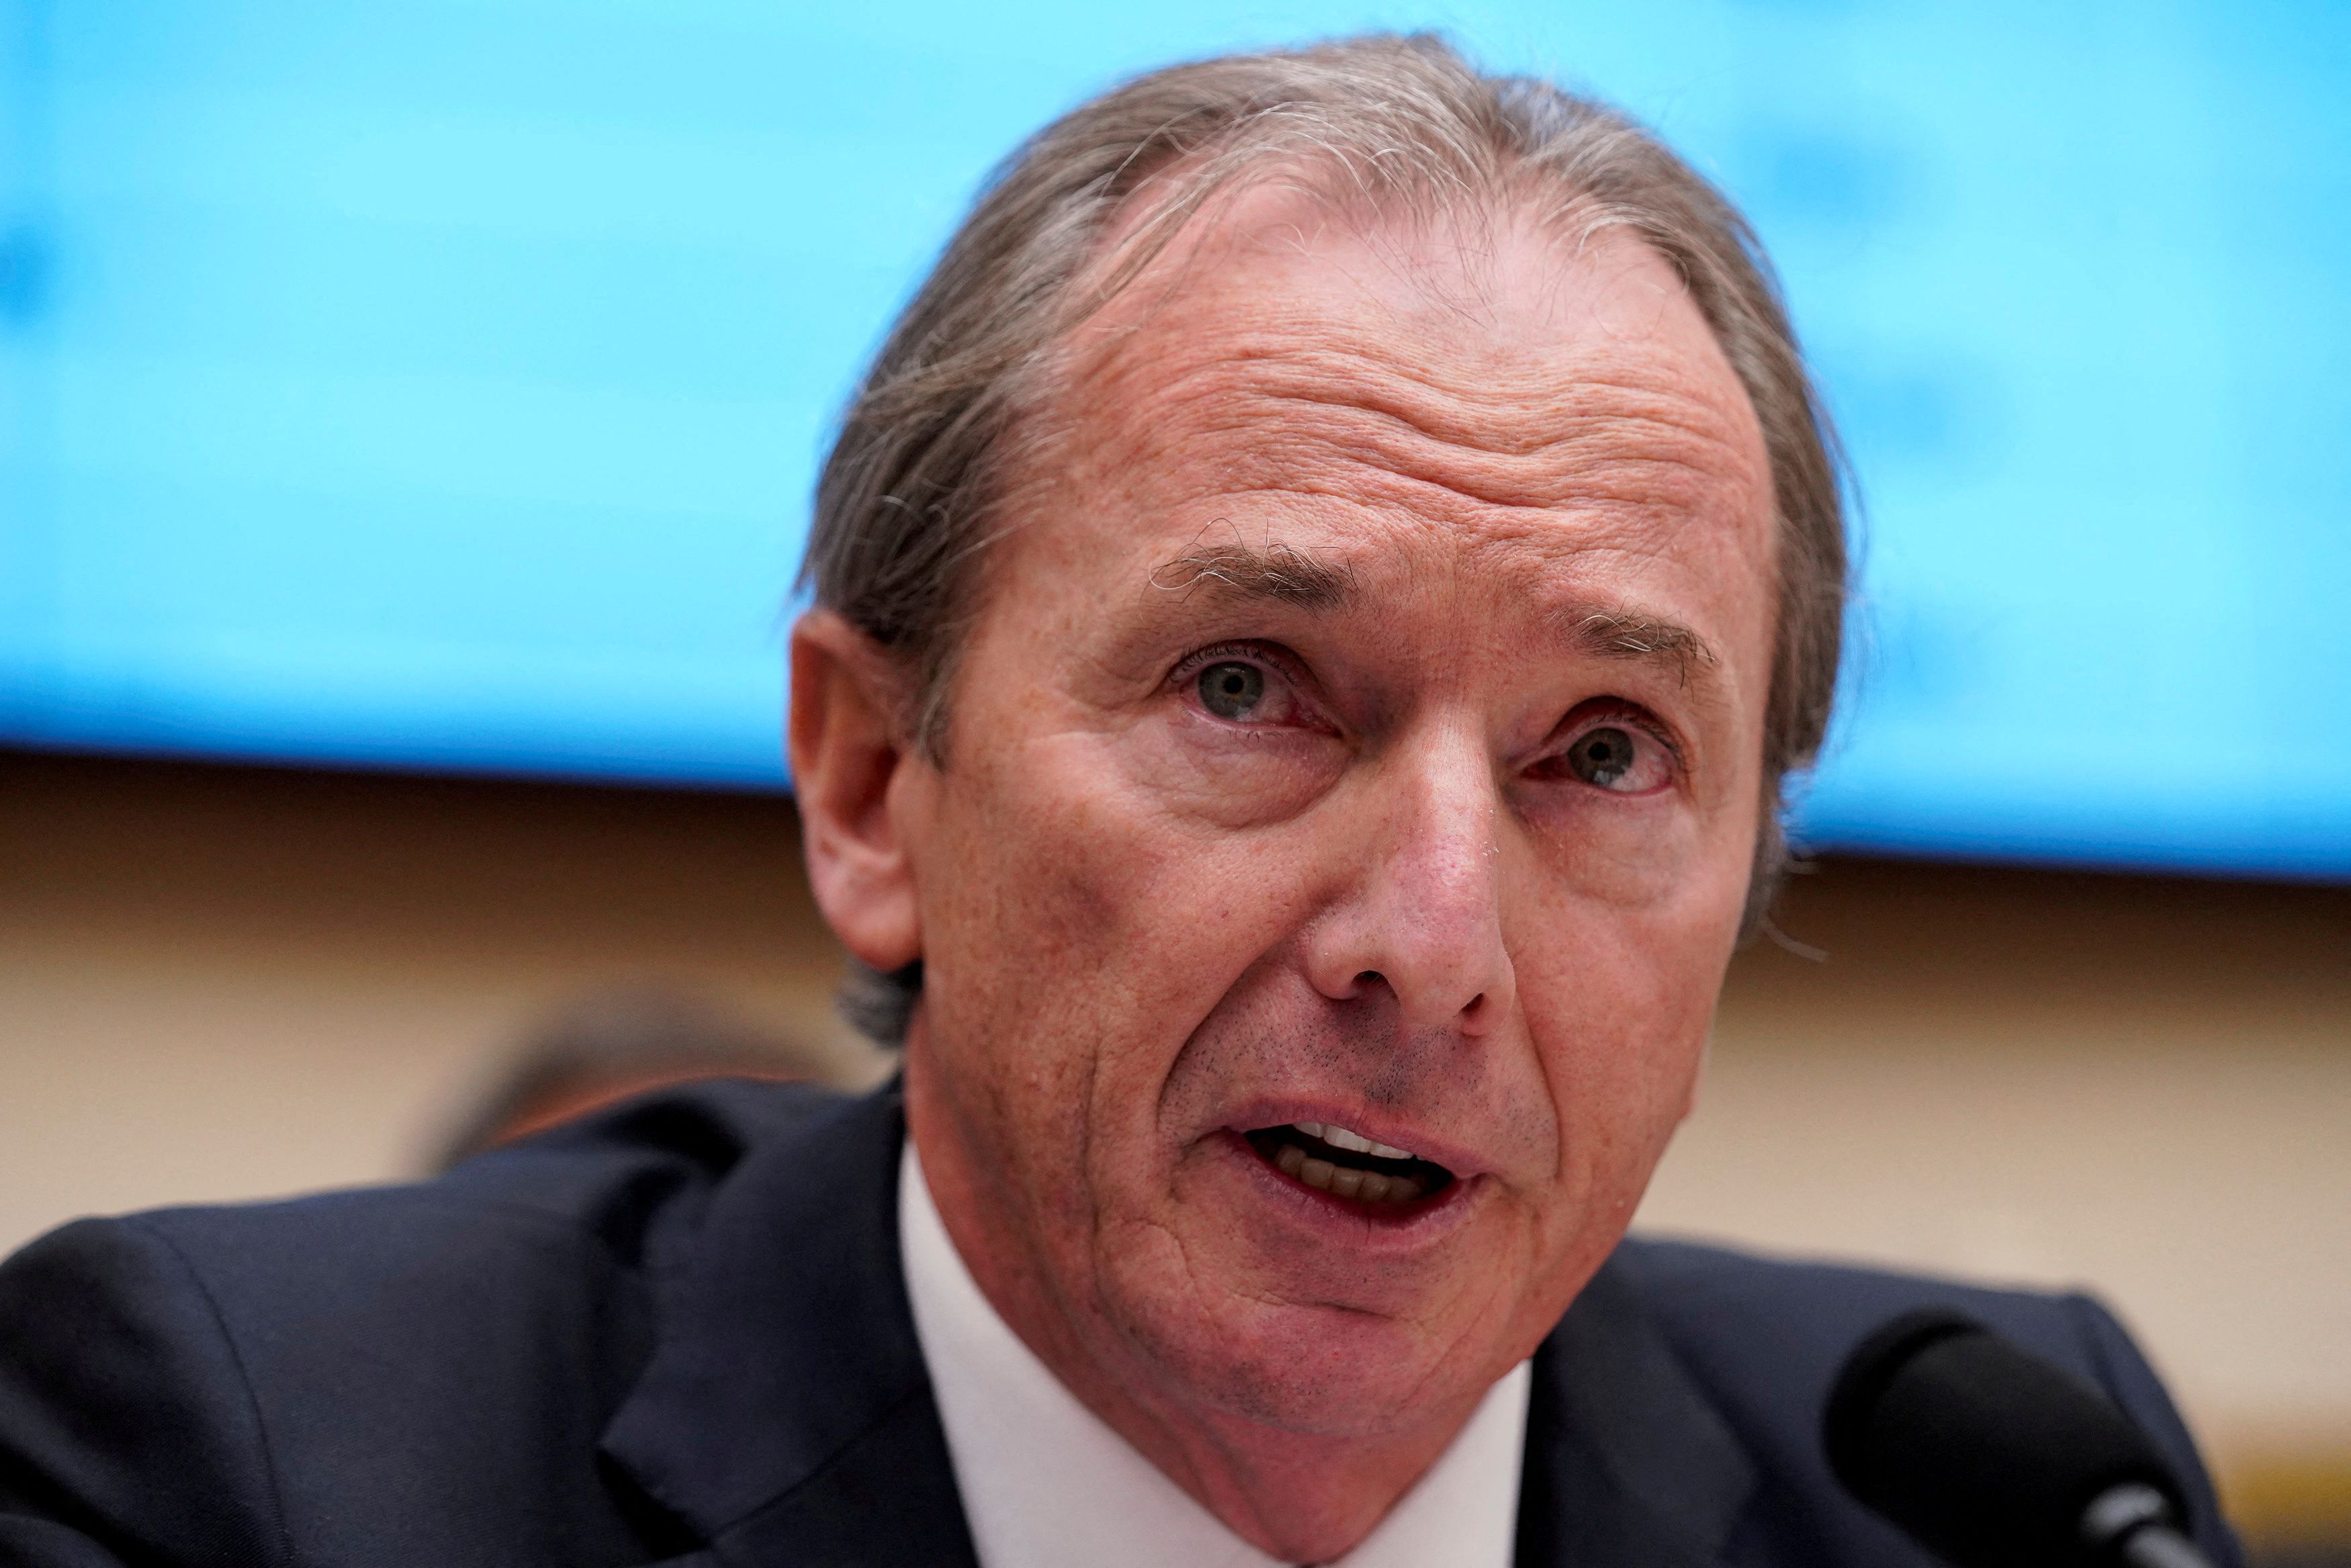 FILE PHOTO: James P. Gorman, chairman & CEO of Morgan Stanley, testifies before a House Financial Services Committee hearing on Capitol Hill in Washington